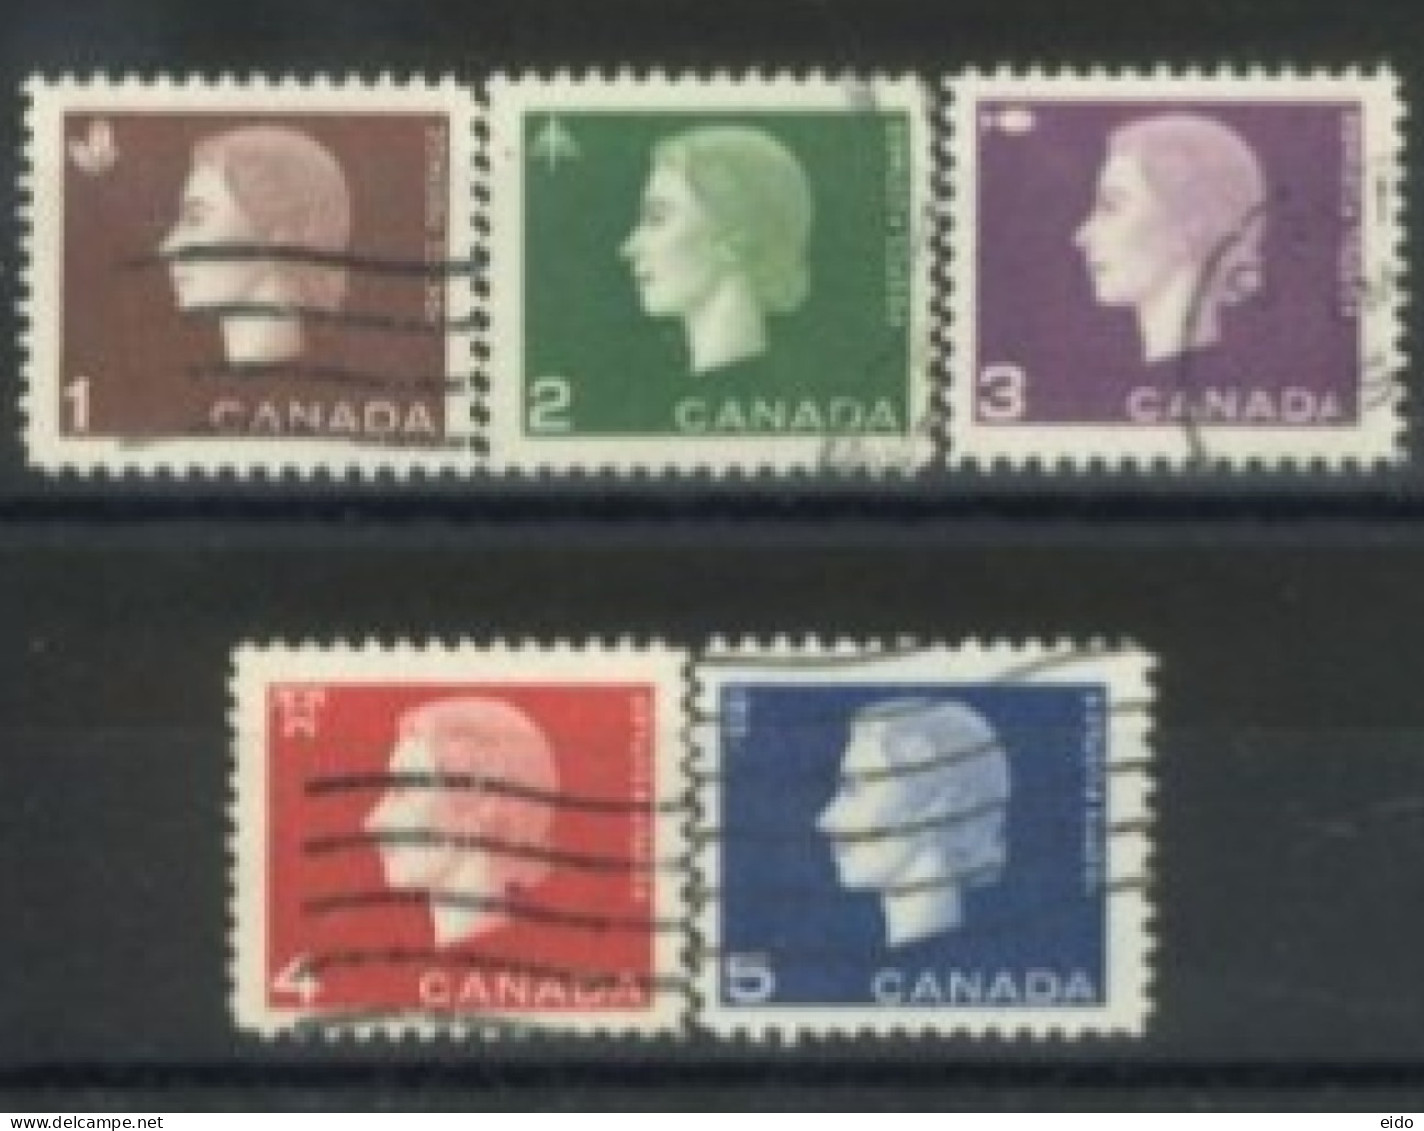 CANADA - 1962, QUEEN ELIZABETH II STAMPS COMPLETE SET OF 5, USED. - Used Stamps